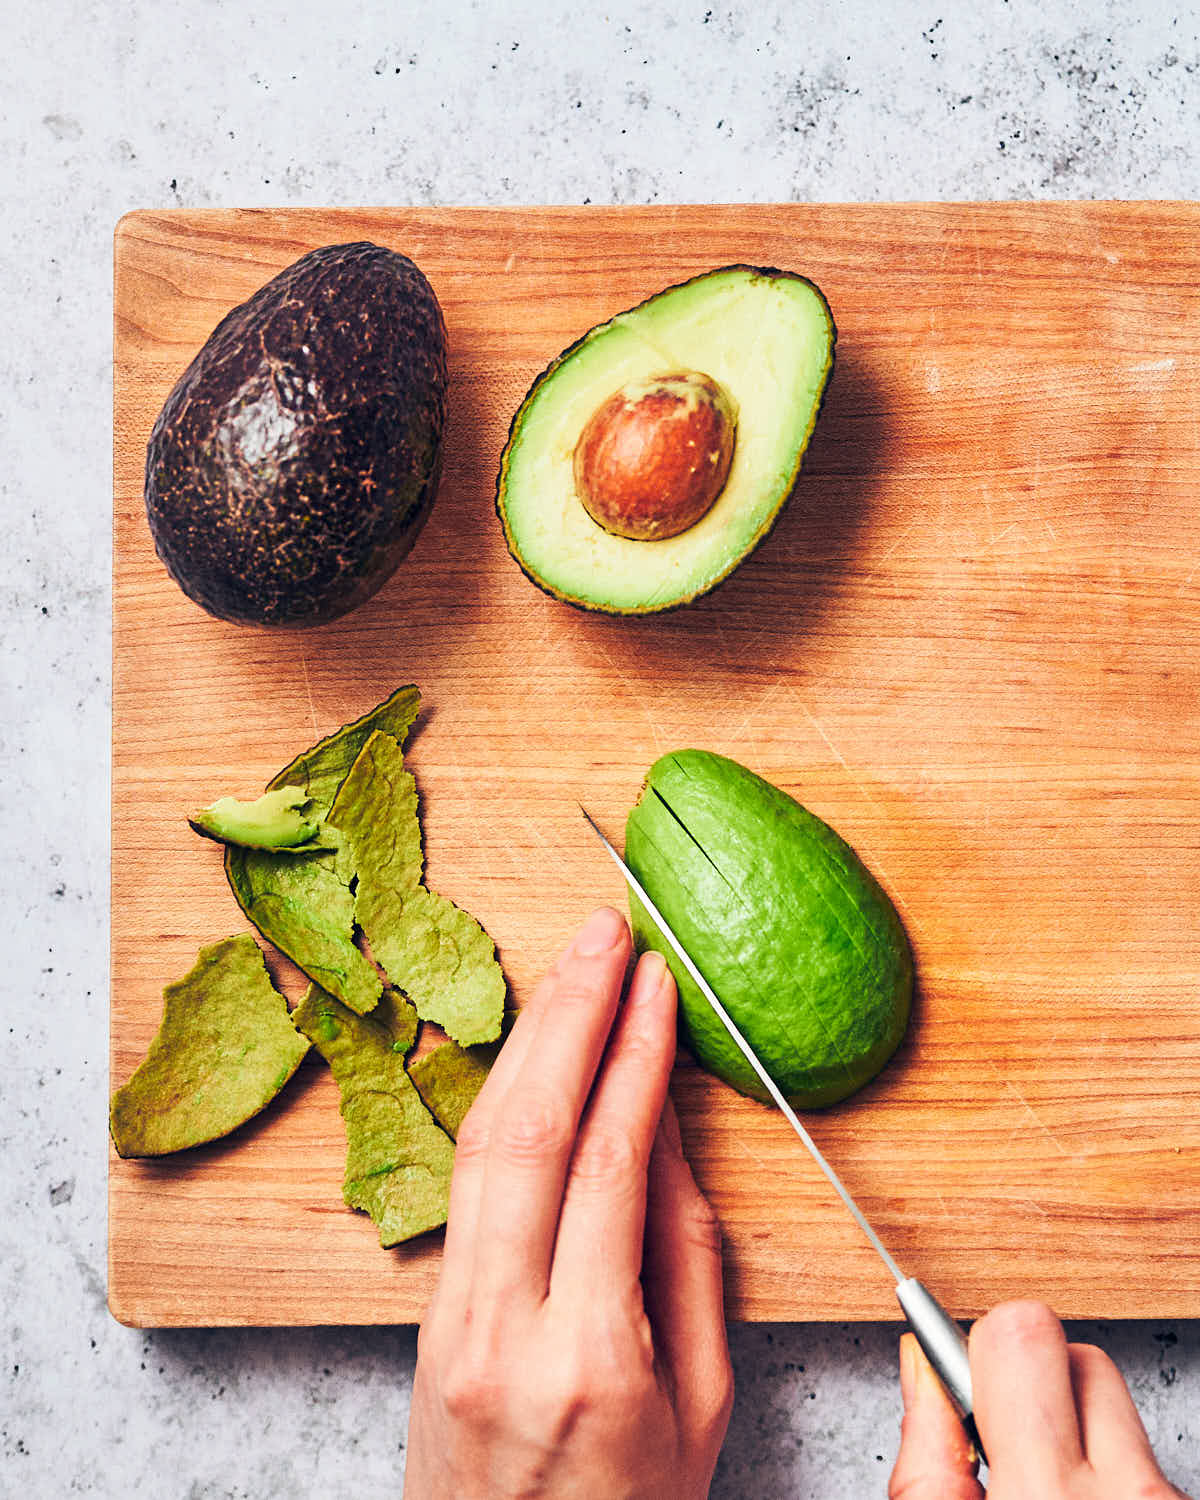 Avocado being sliced with a knife on a wooden cutting board